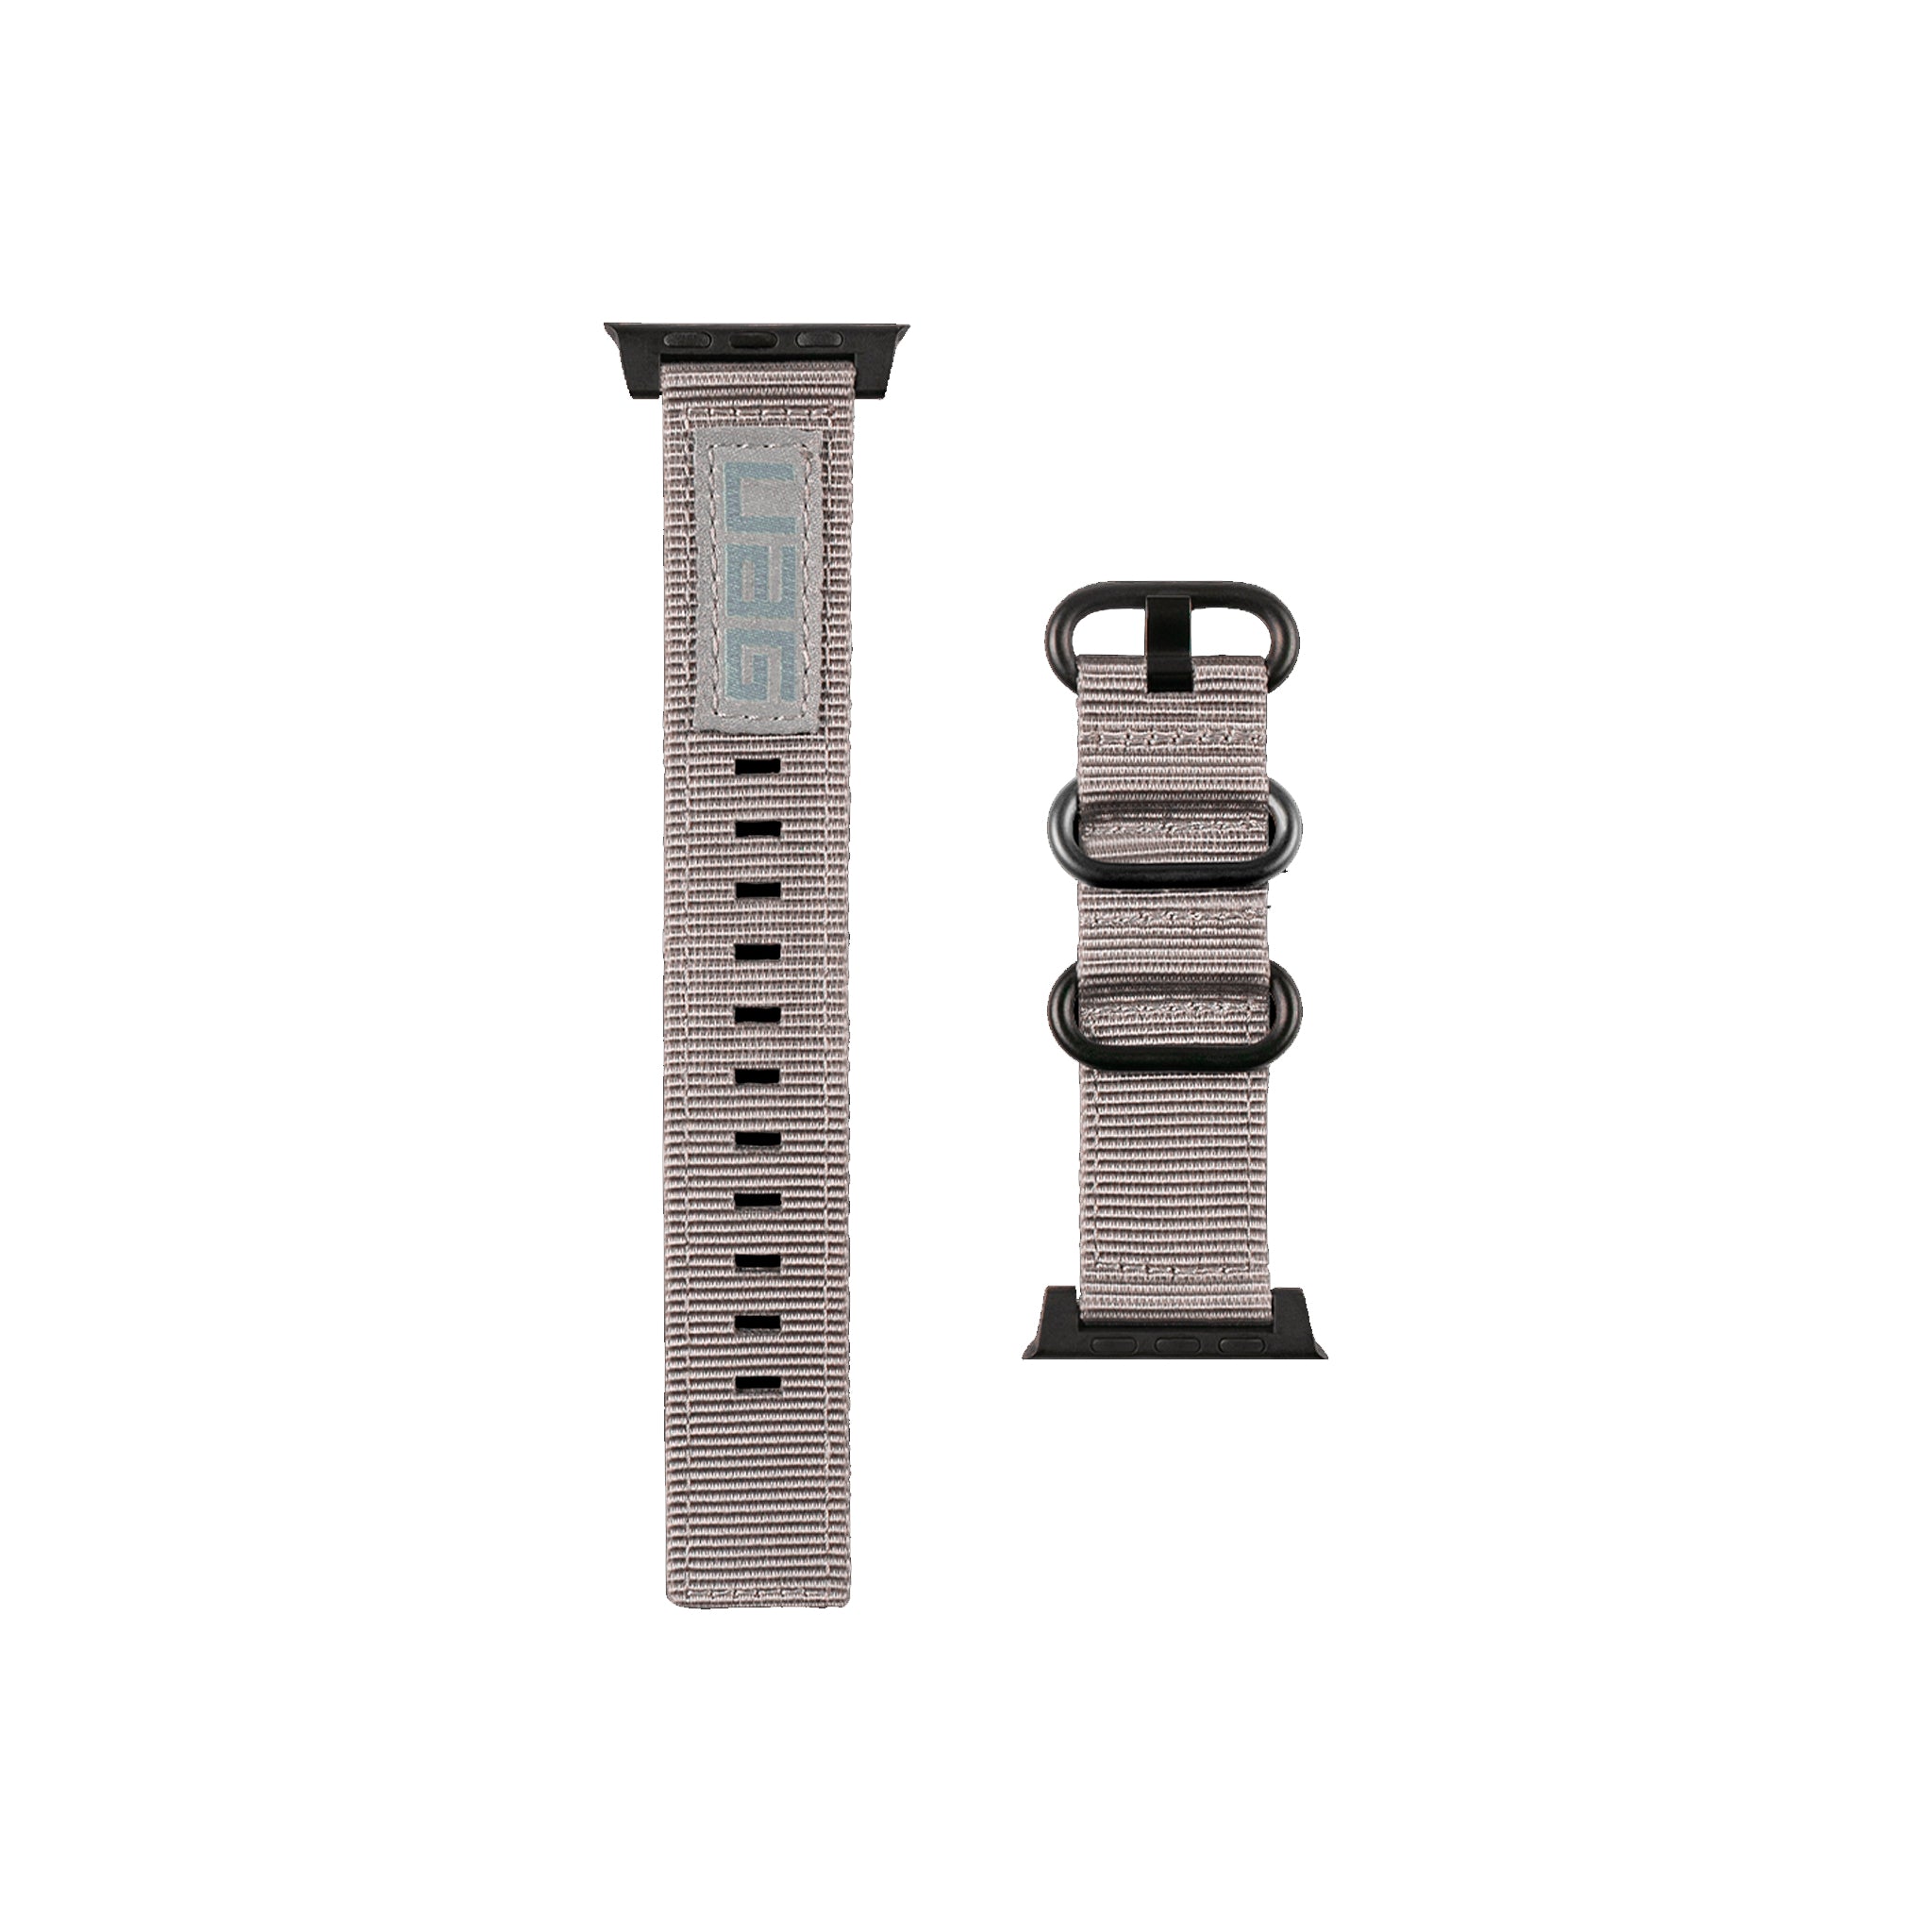 Urban Armor Gear (uag) - Nato Watchband For Apple Watch 40mm / 38mm - Gray